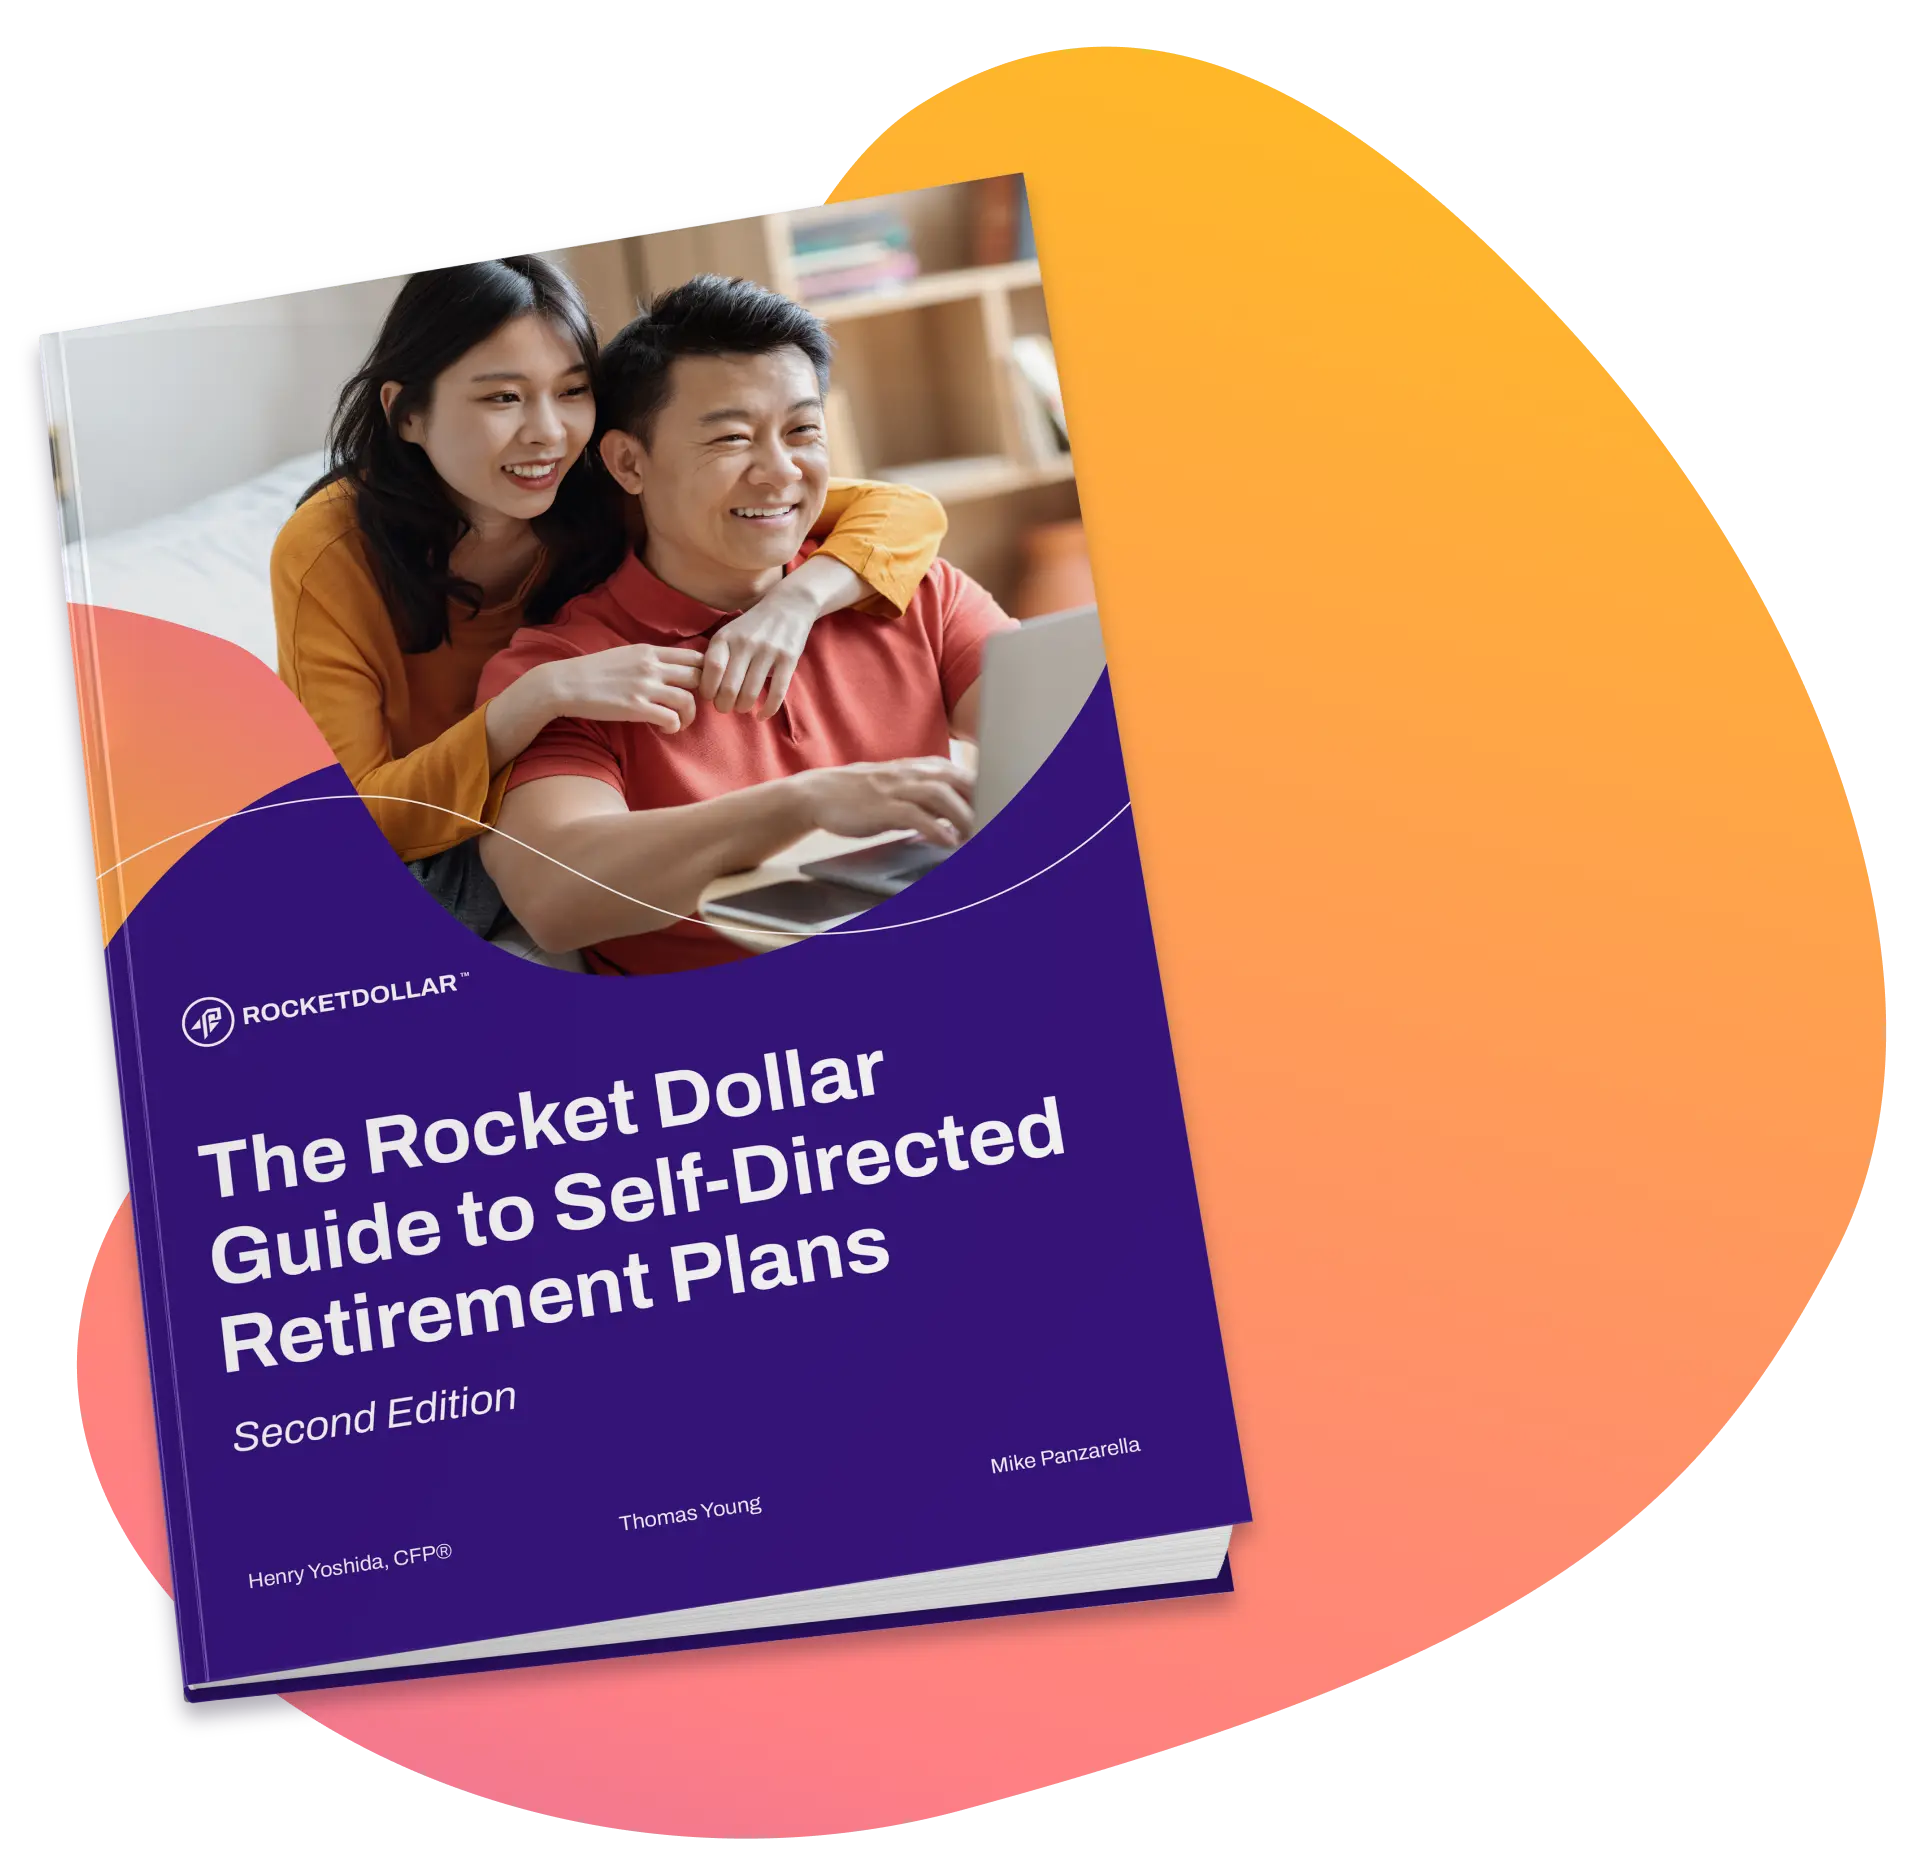 The Rocket Dollar Guide to Self-Directed Retirement Plans Second Edition